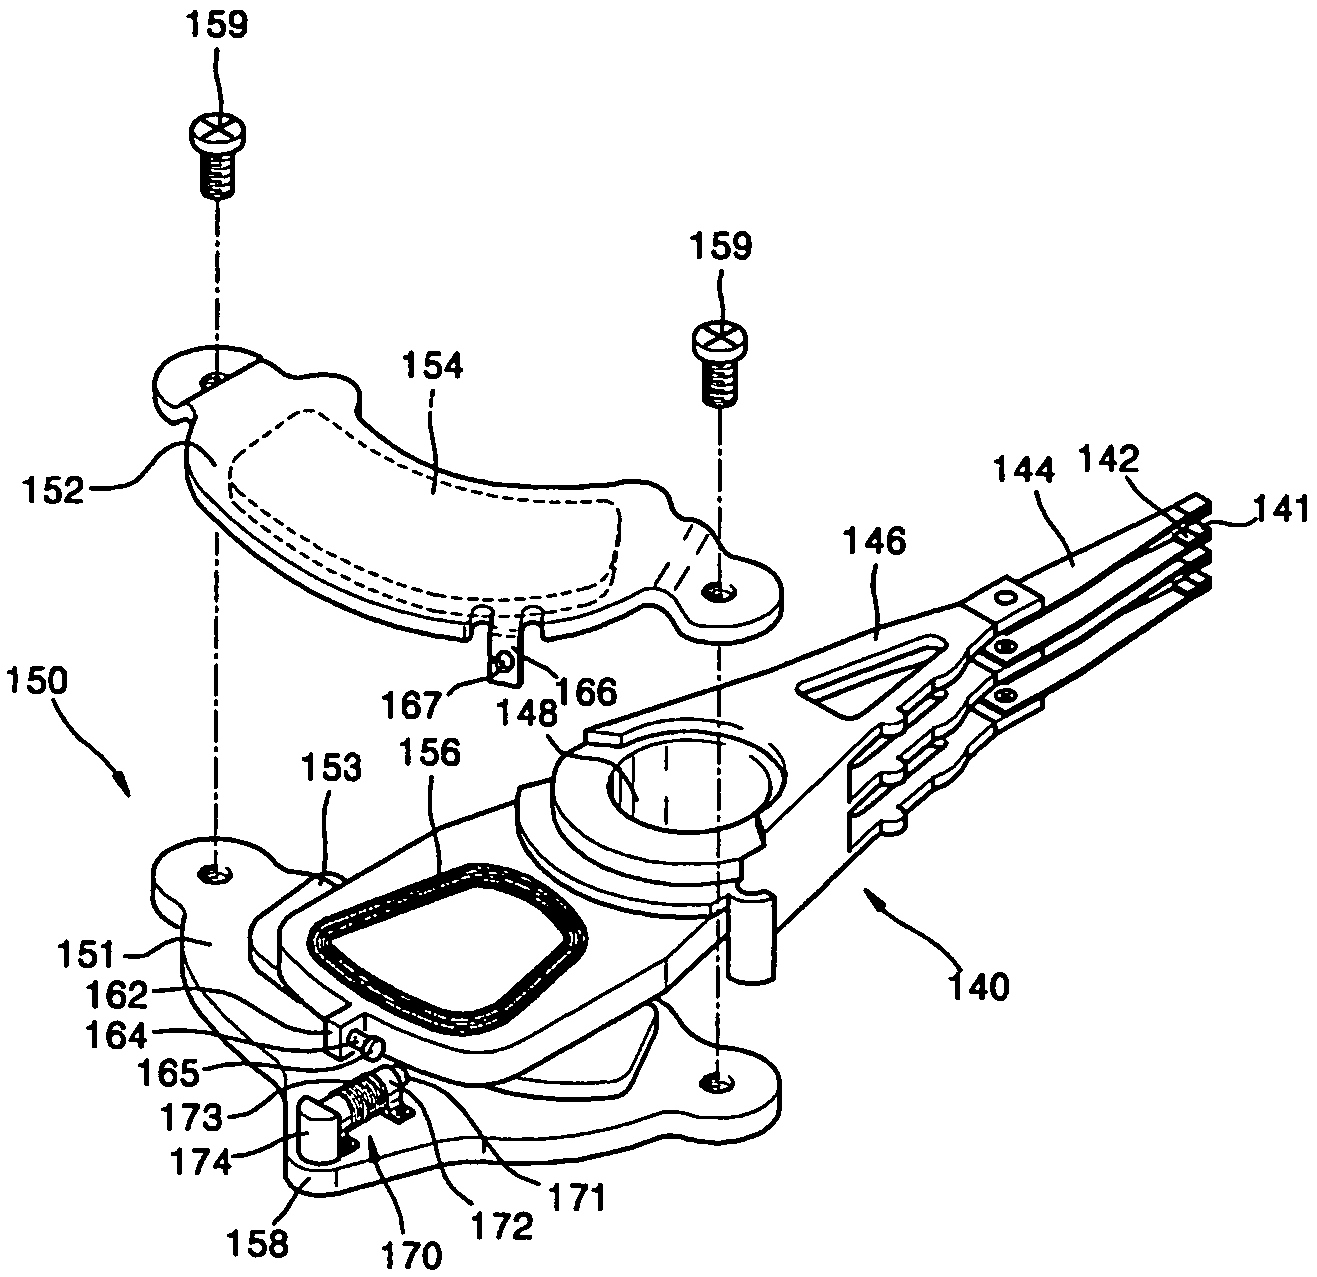 Disk drive actuator latch apparatus and method